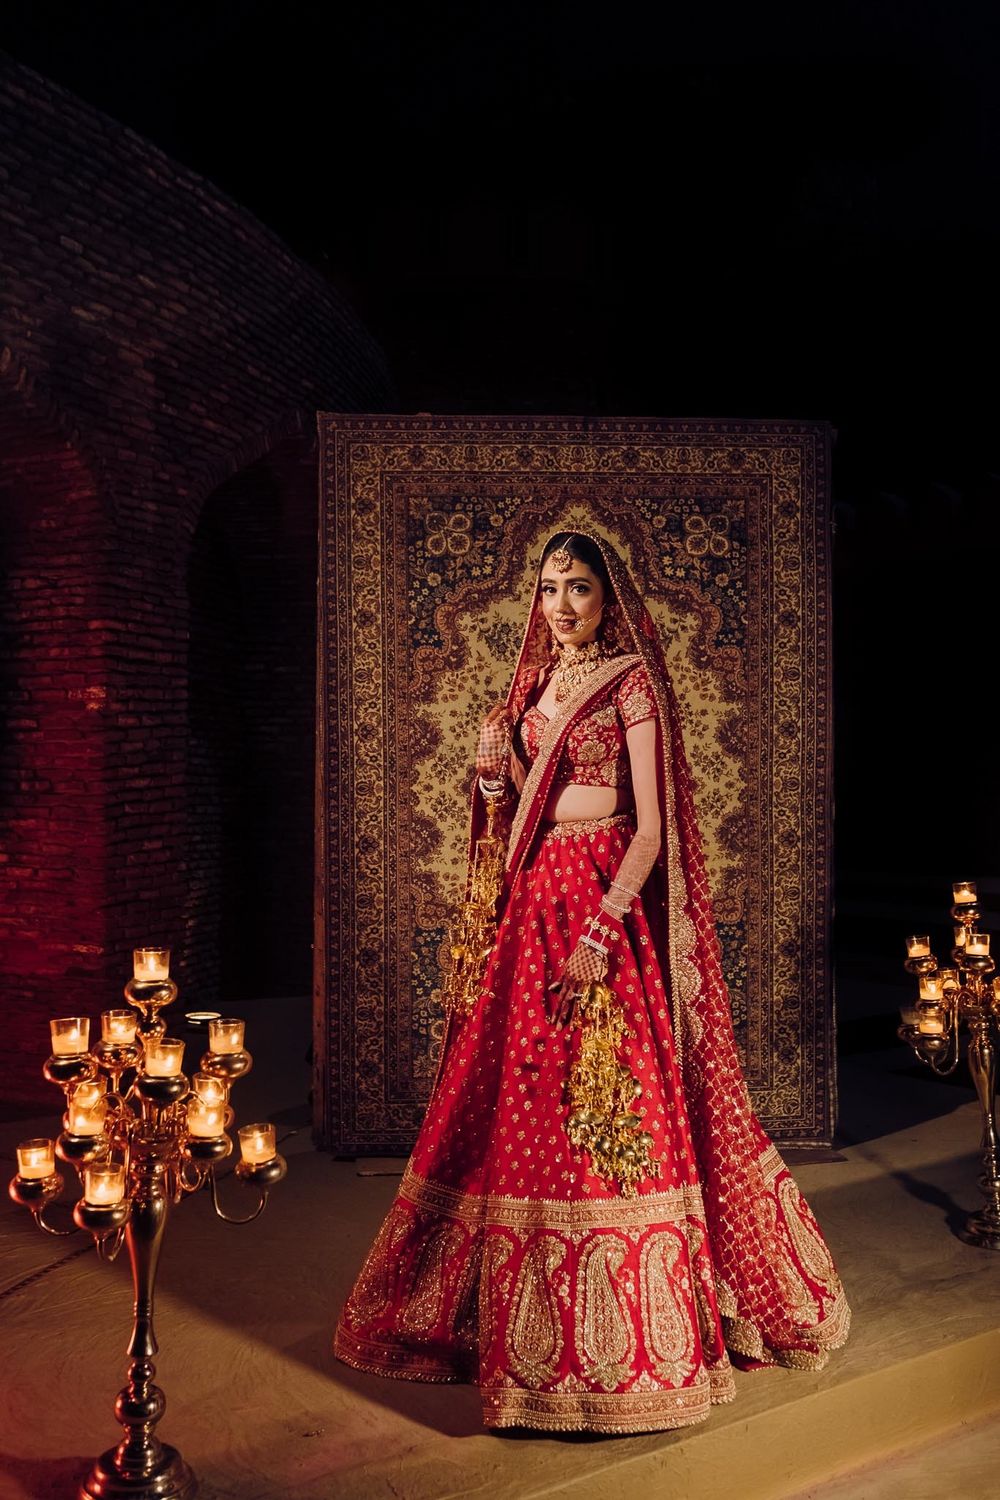 Photo of Bride wearing a red lehenga on her wedding day.